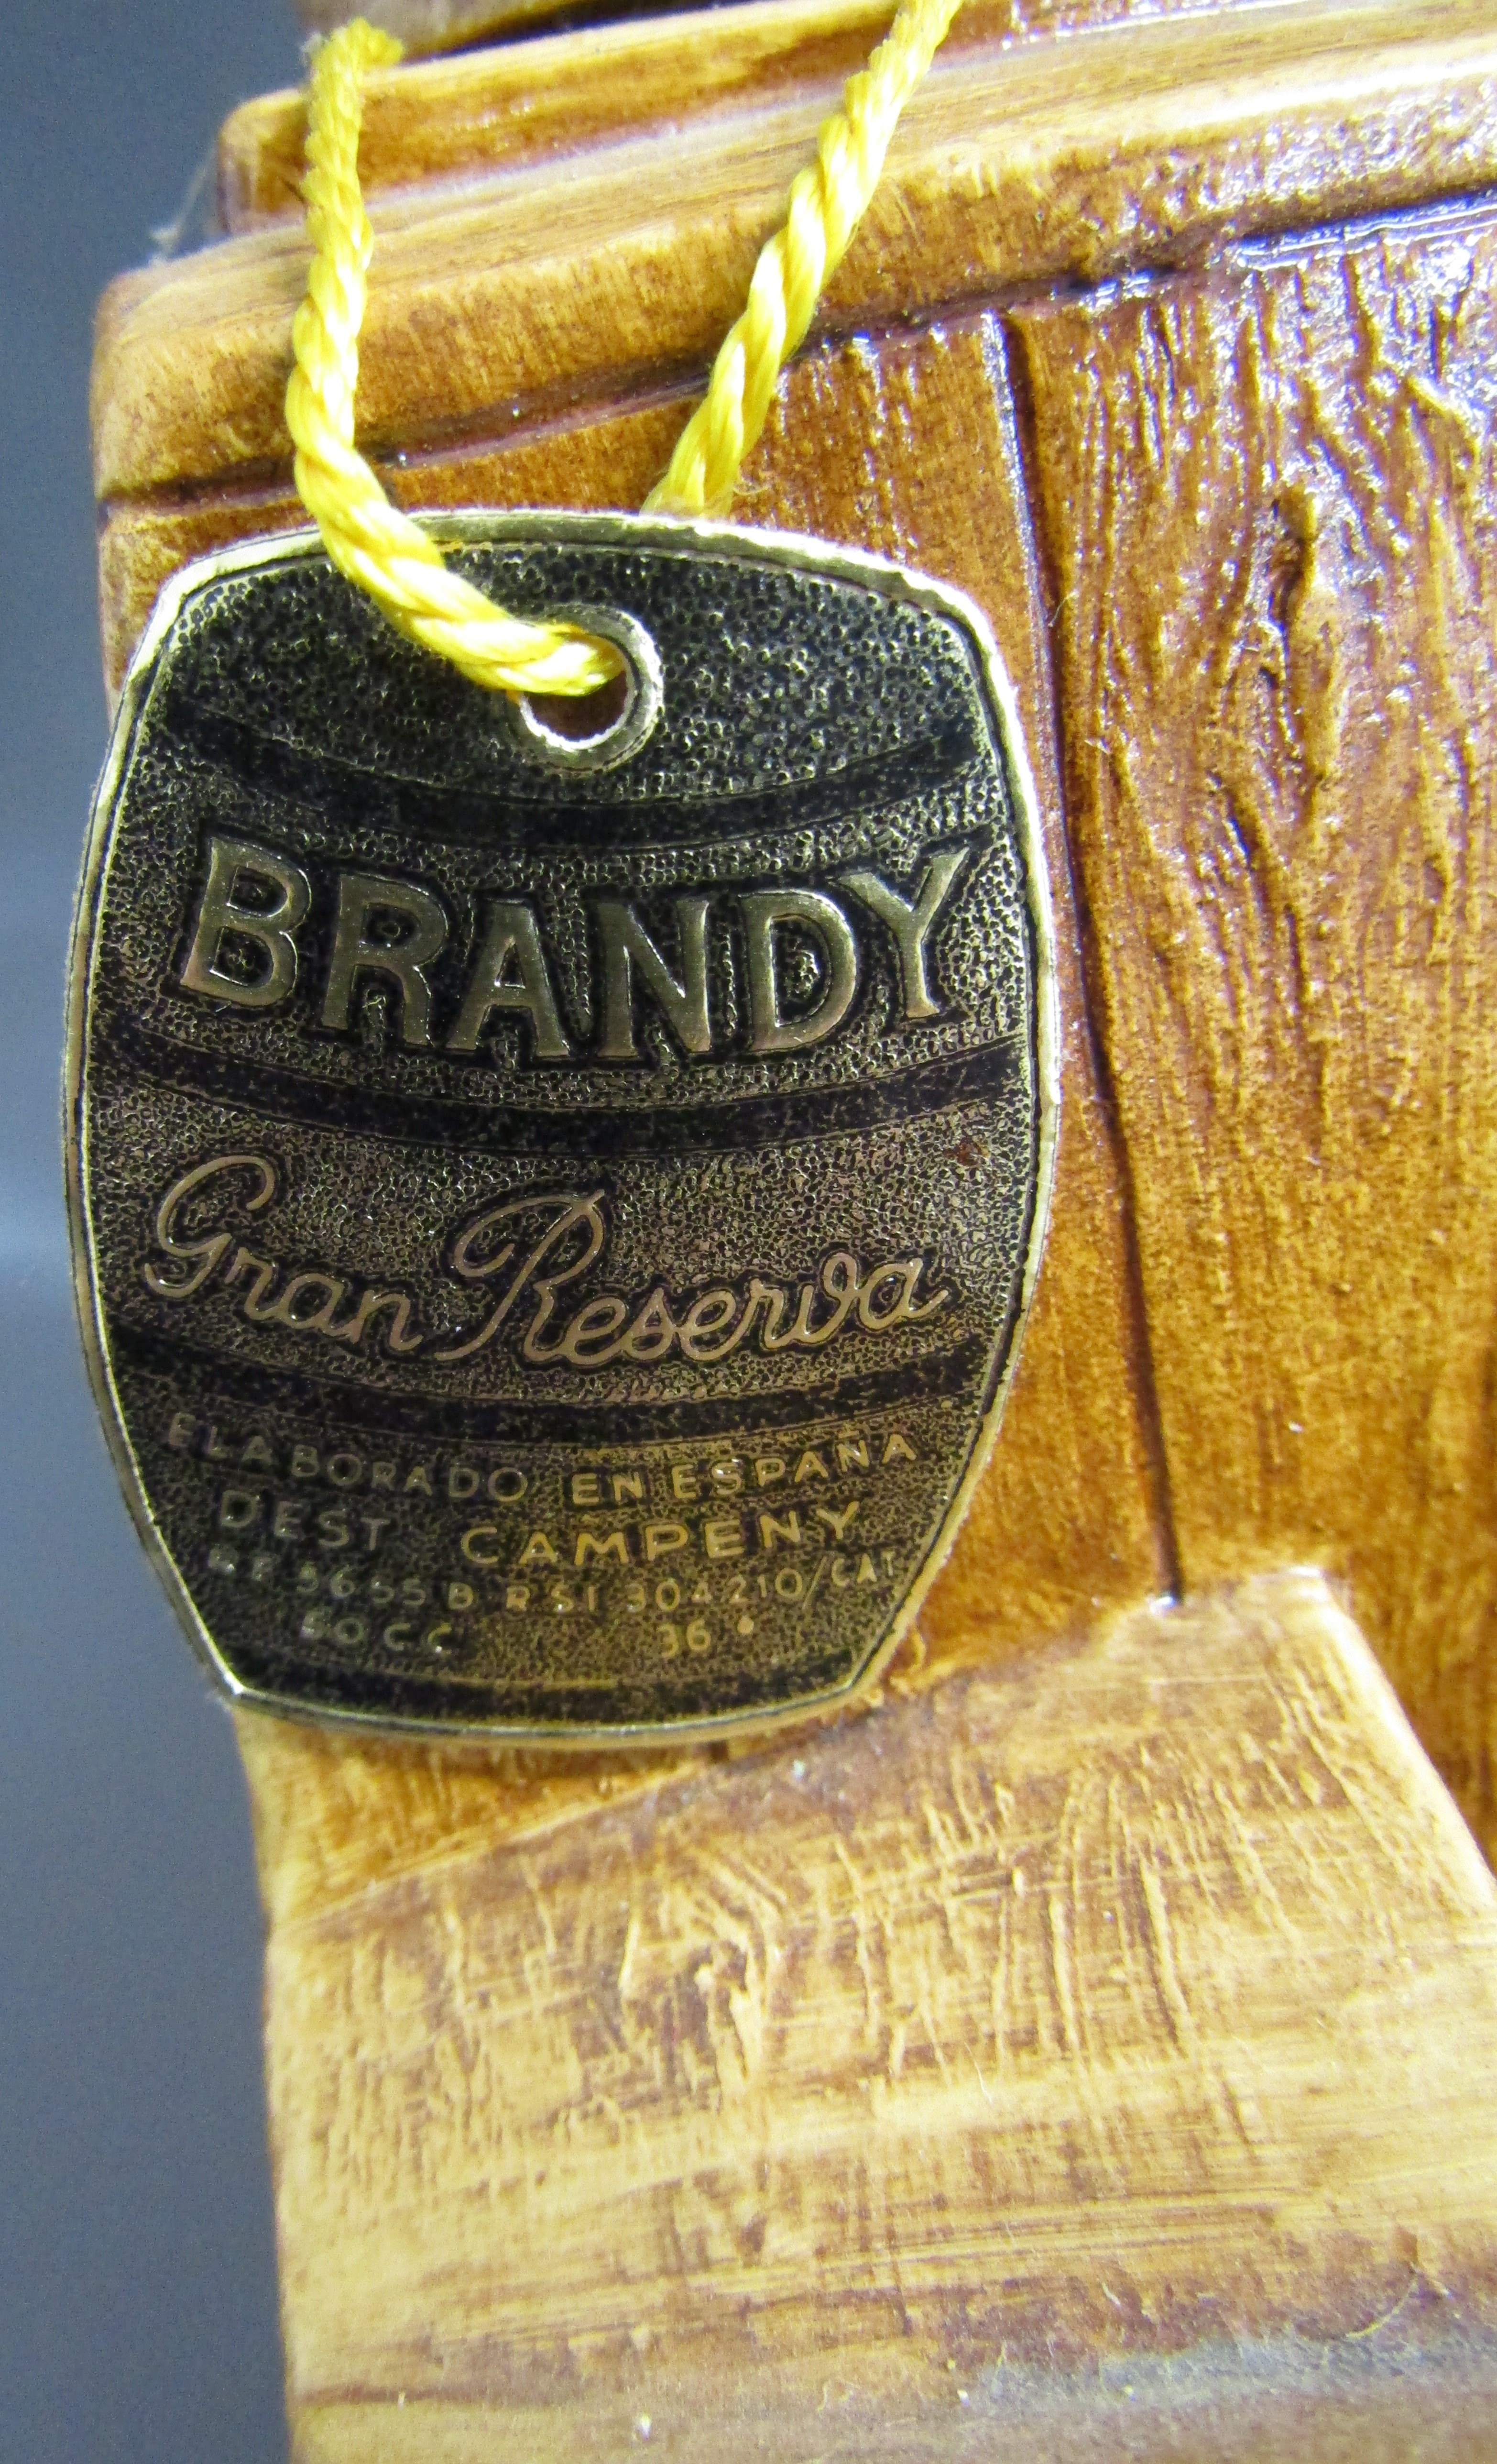 Teichenne figural brandy bottles - Napoleon and Shoot dog and man also Gran Reserve brandy ' - Image 3 of 5